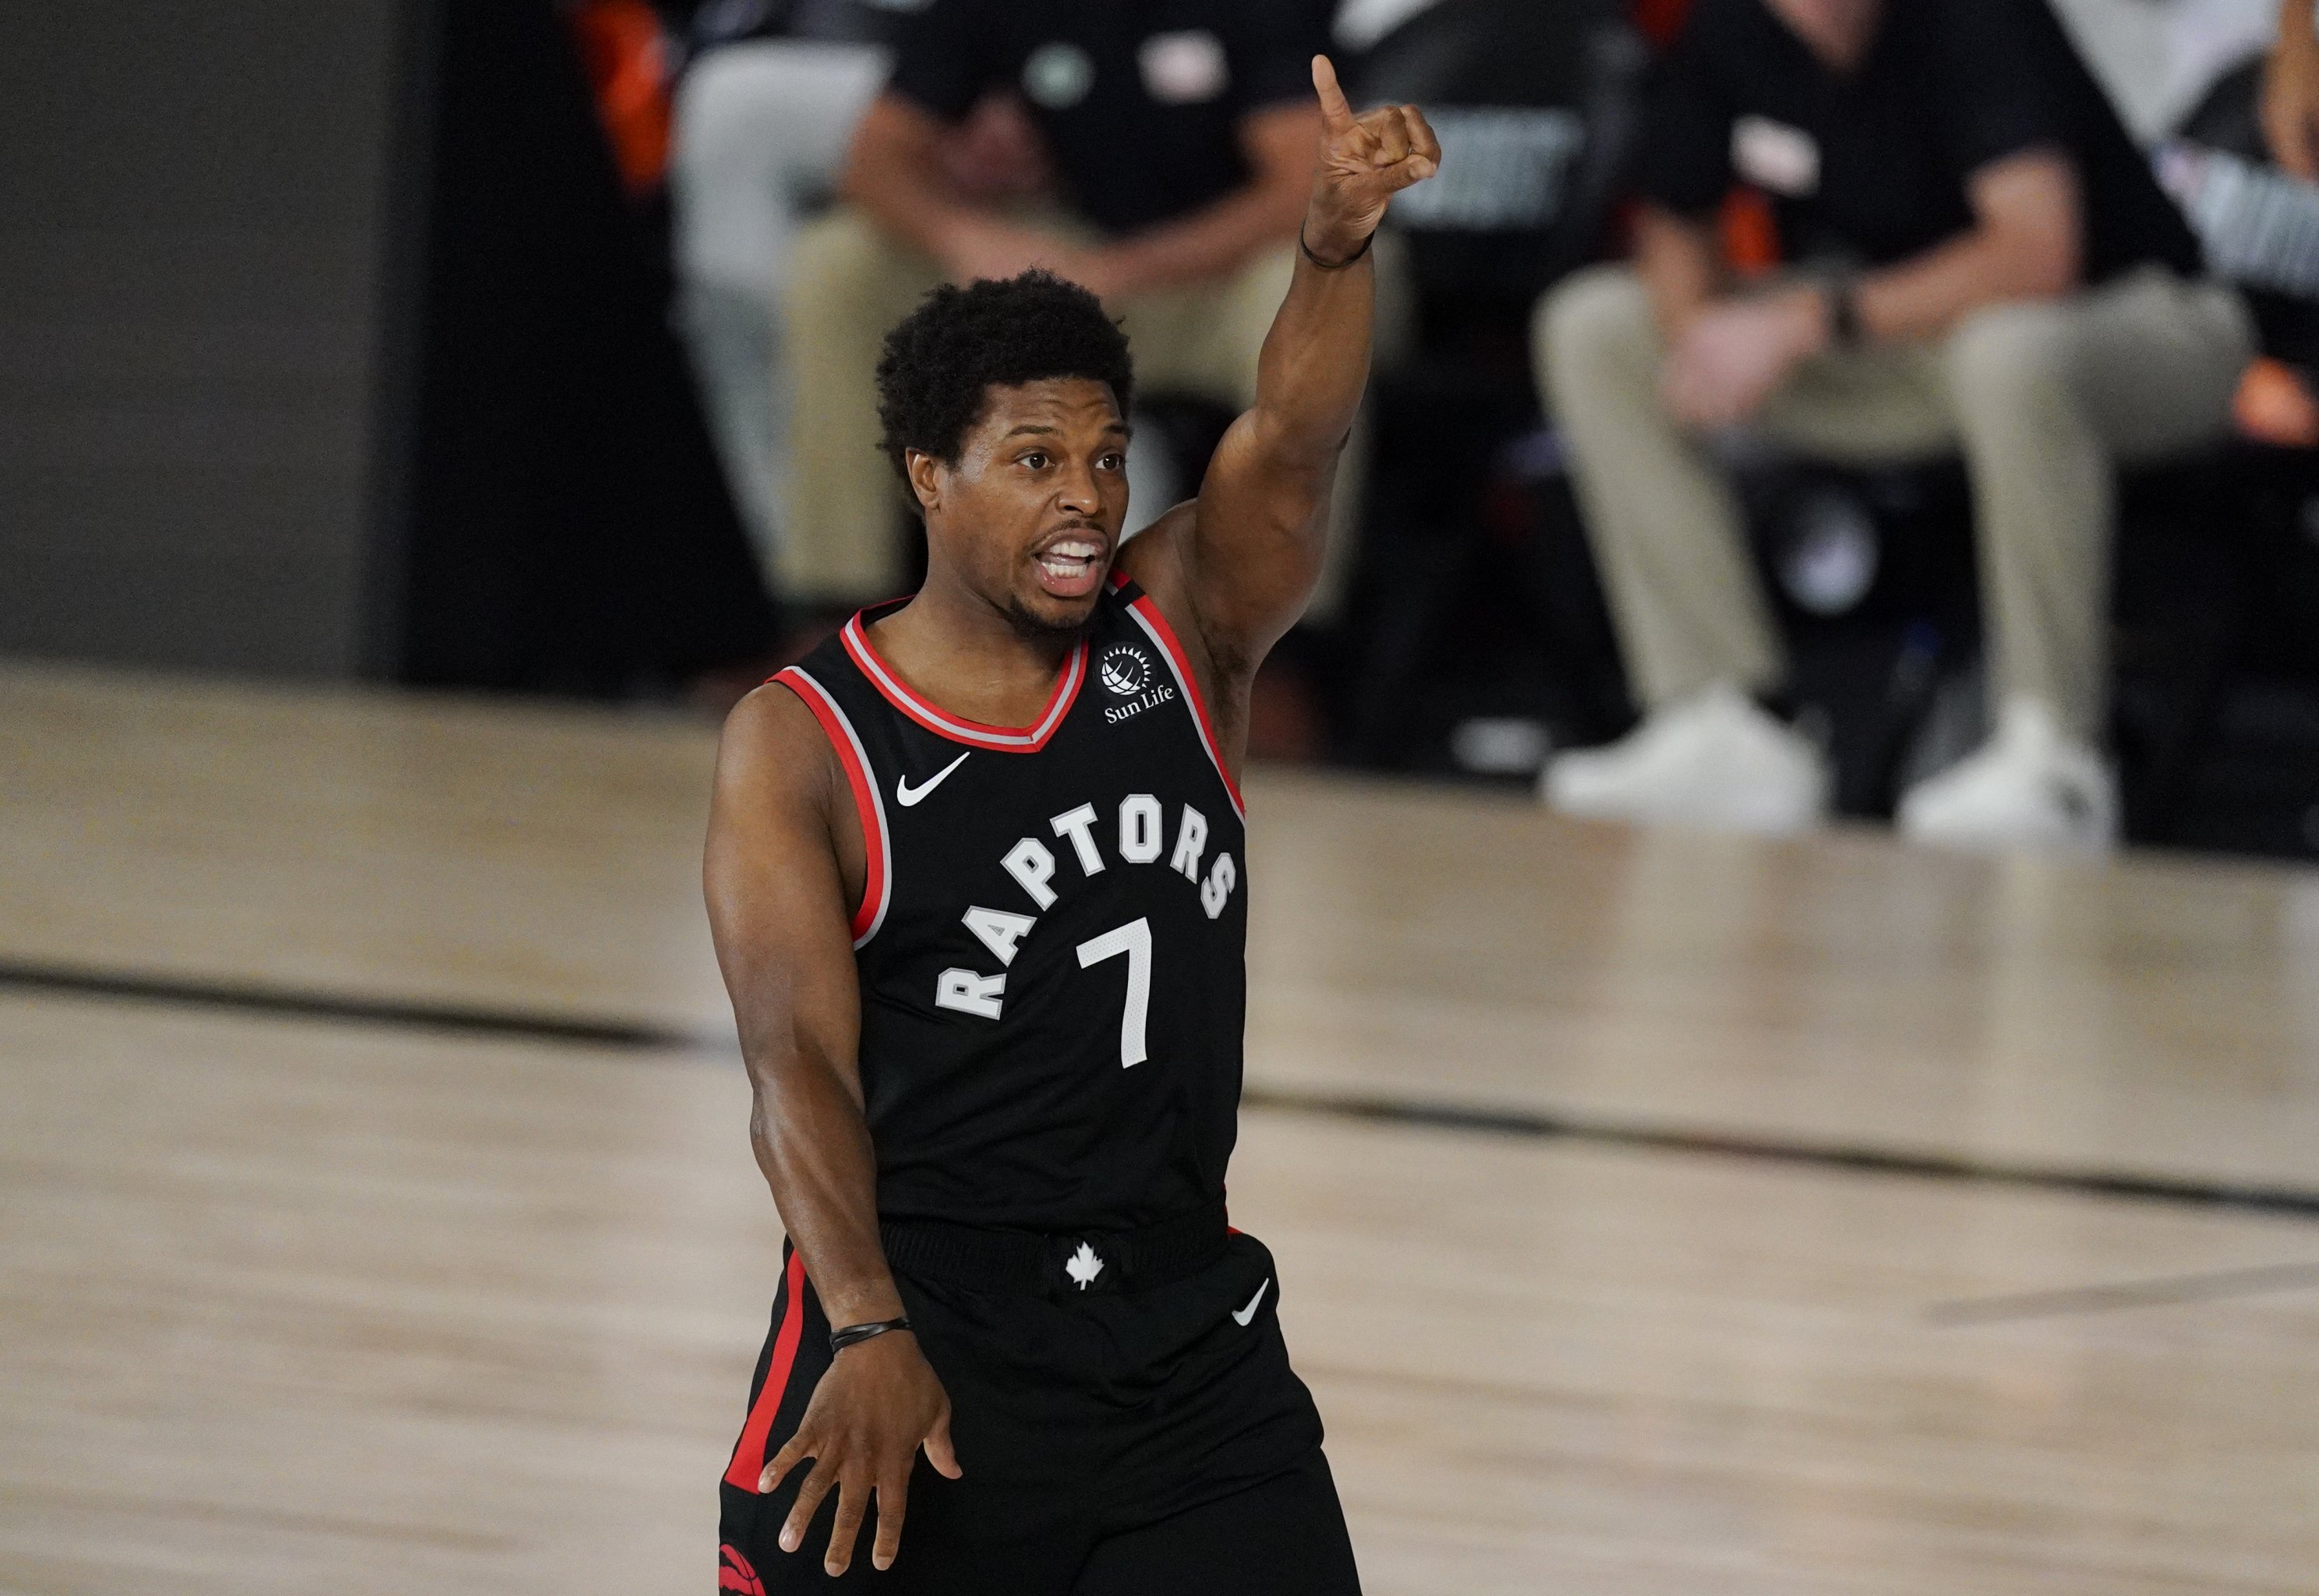 What does Temple bring to the Raptors? - OverDrive, Part 1